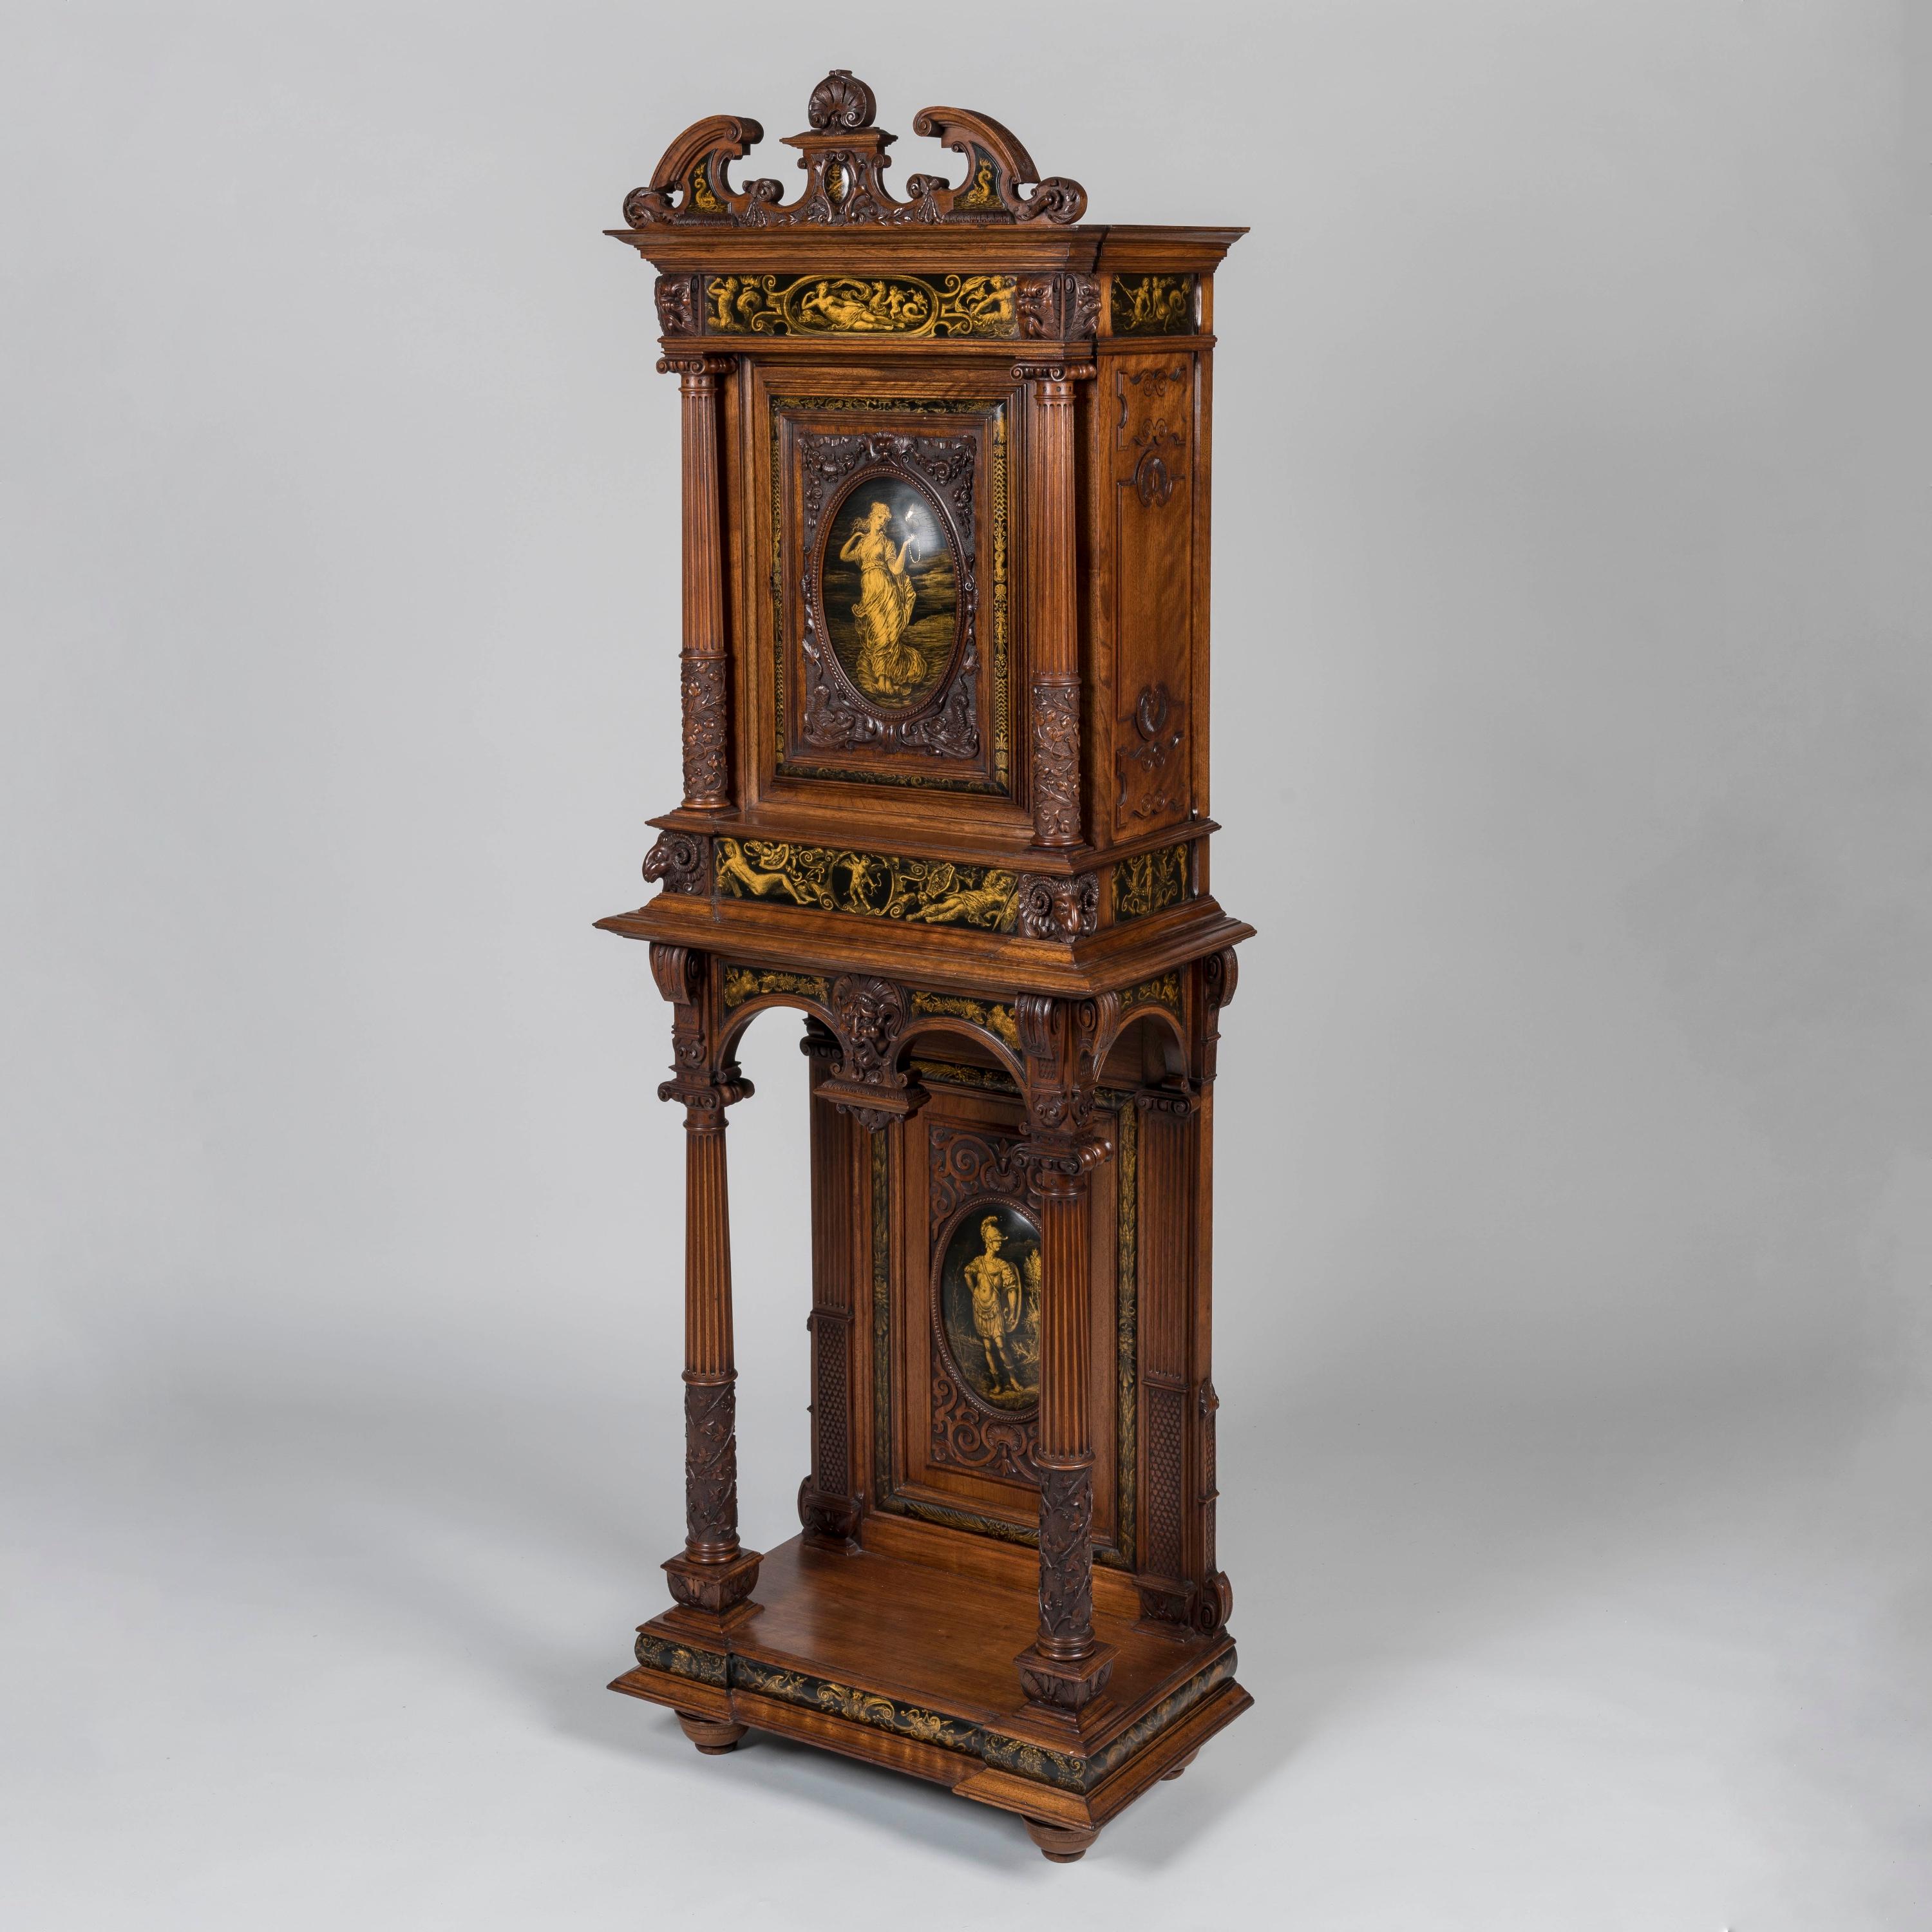 Renaissance Revival 19th Century English Walnut Cabinet in the Renaissance Manner by Gillows For Sale